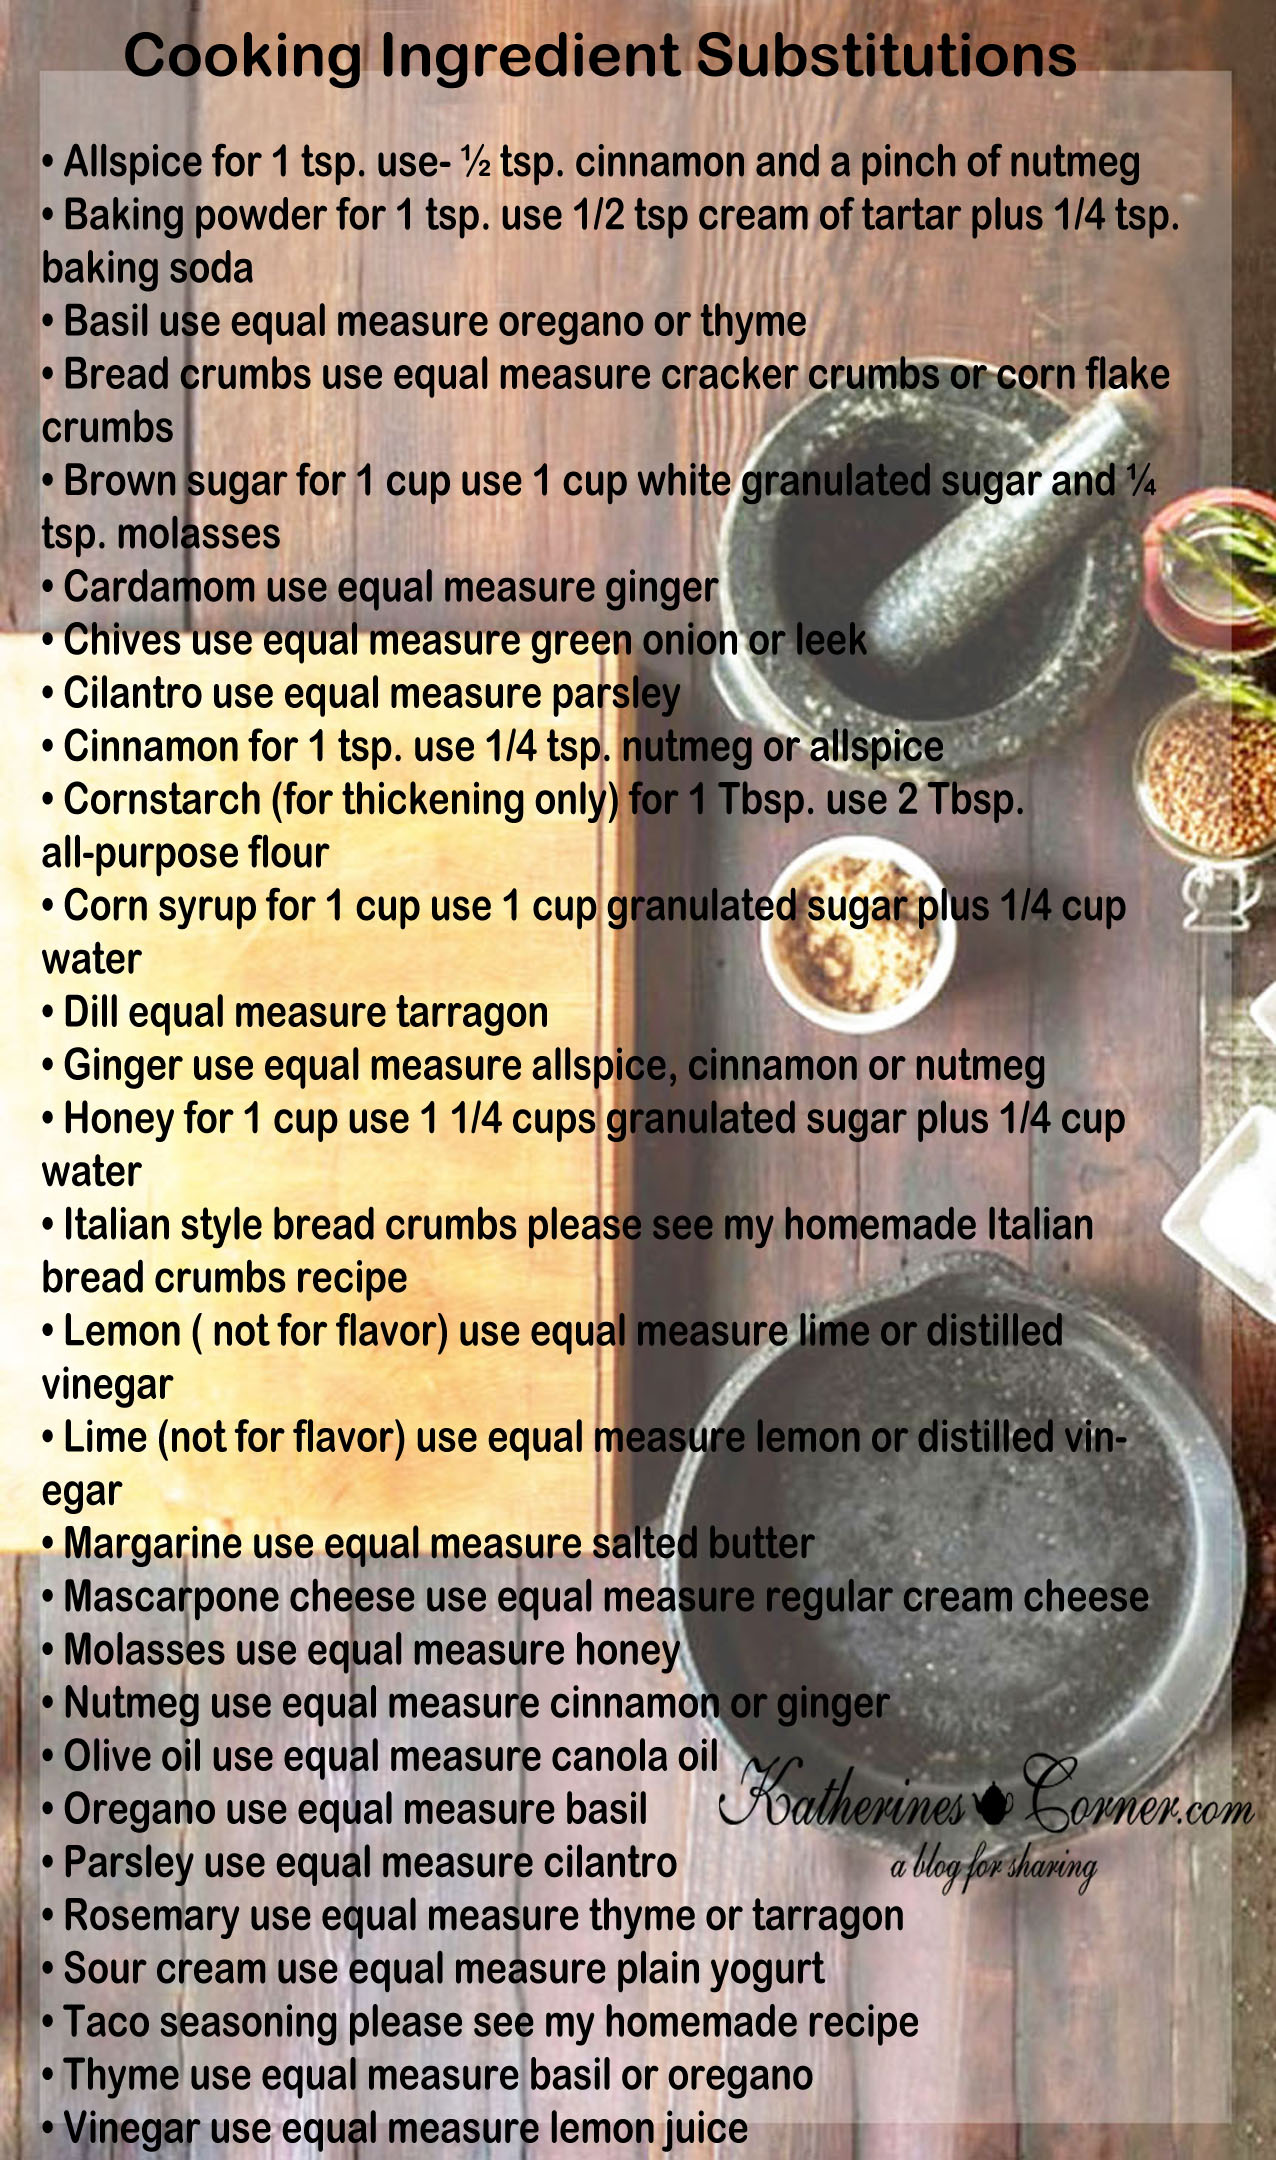 Cooking Ingredient Substitutions